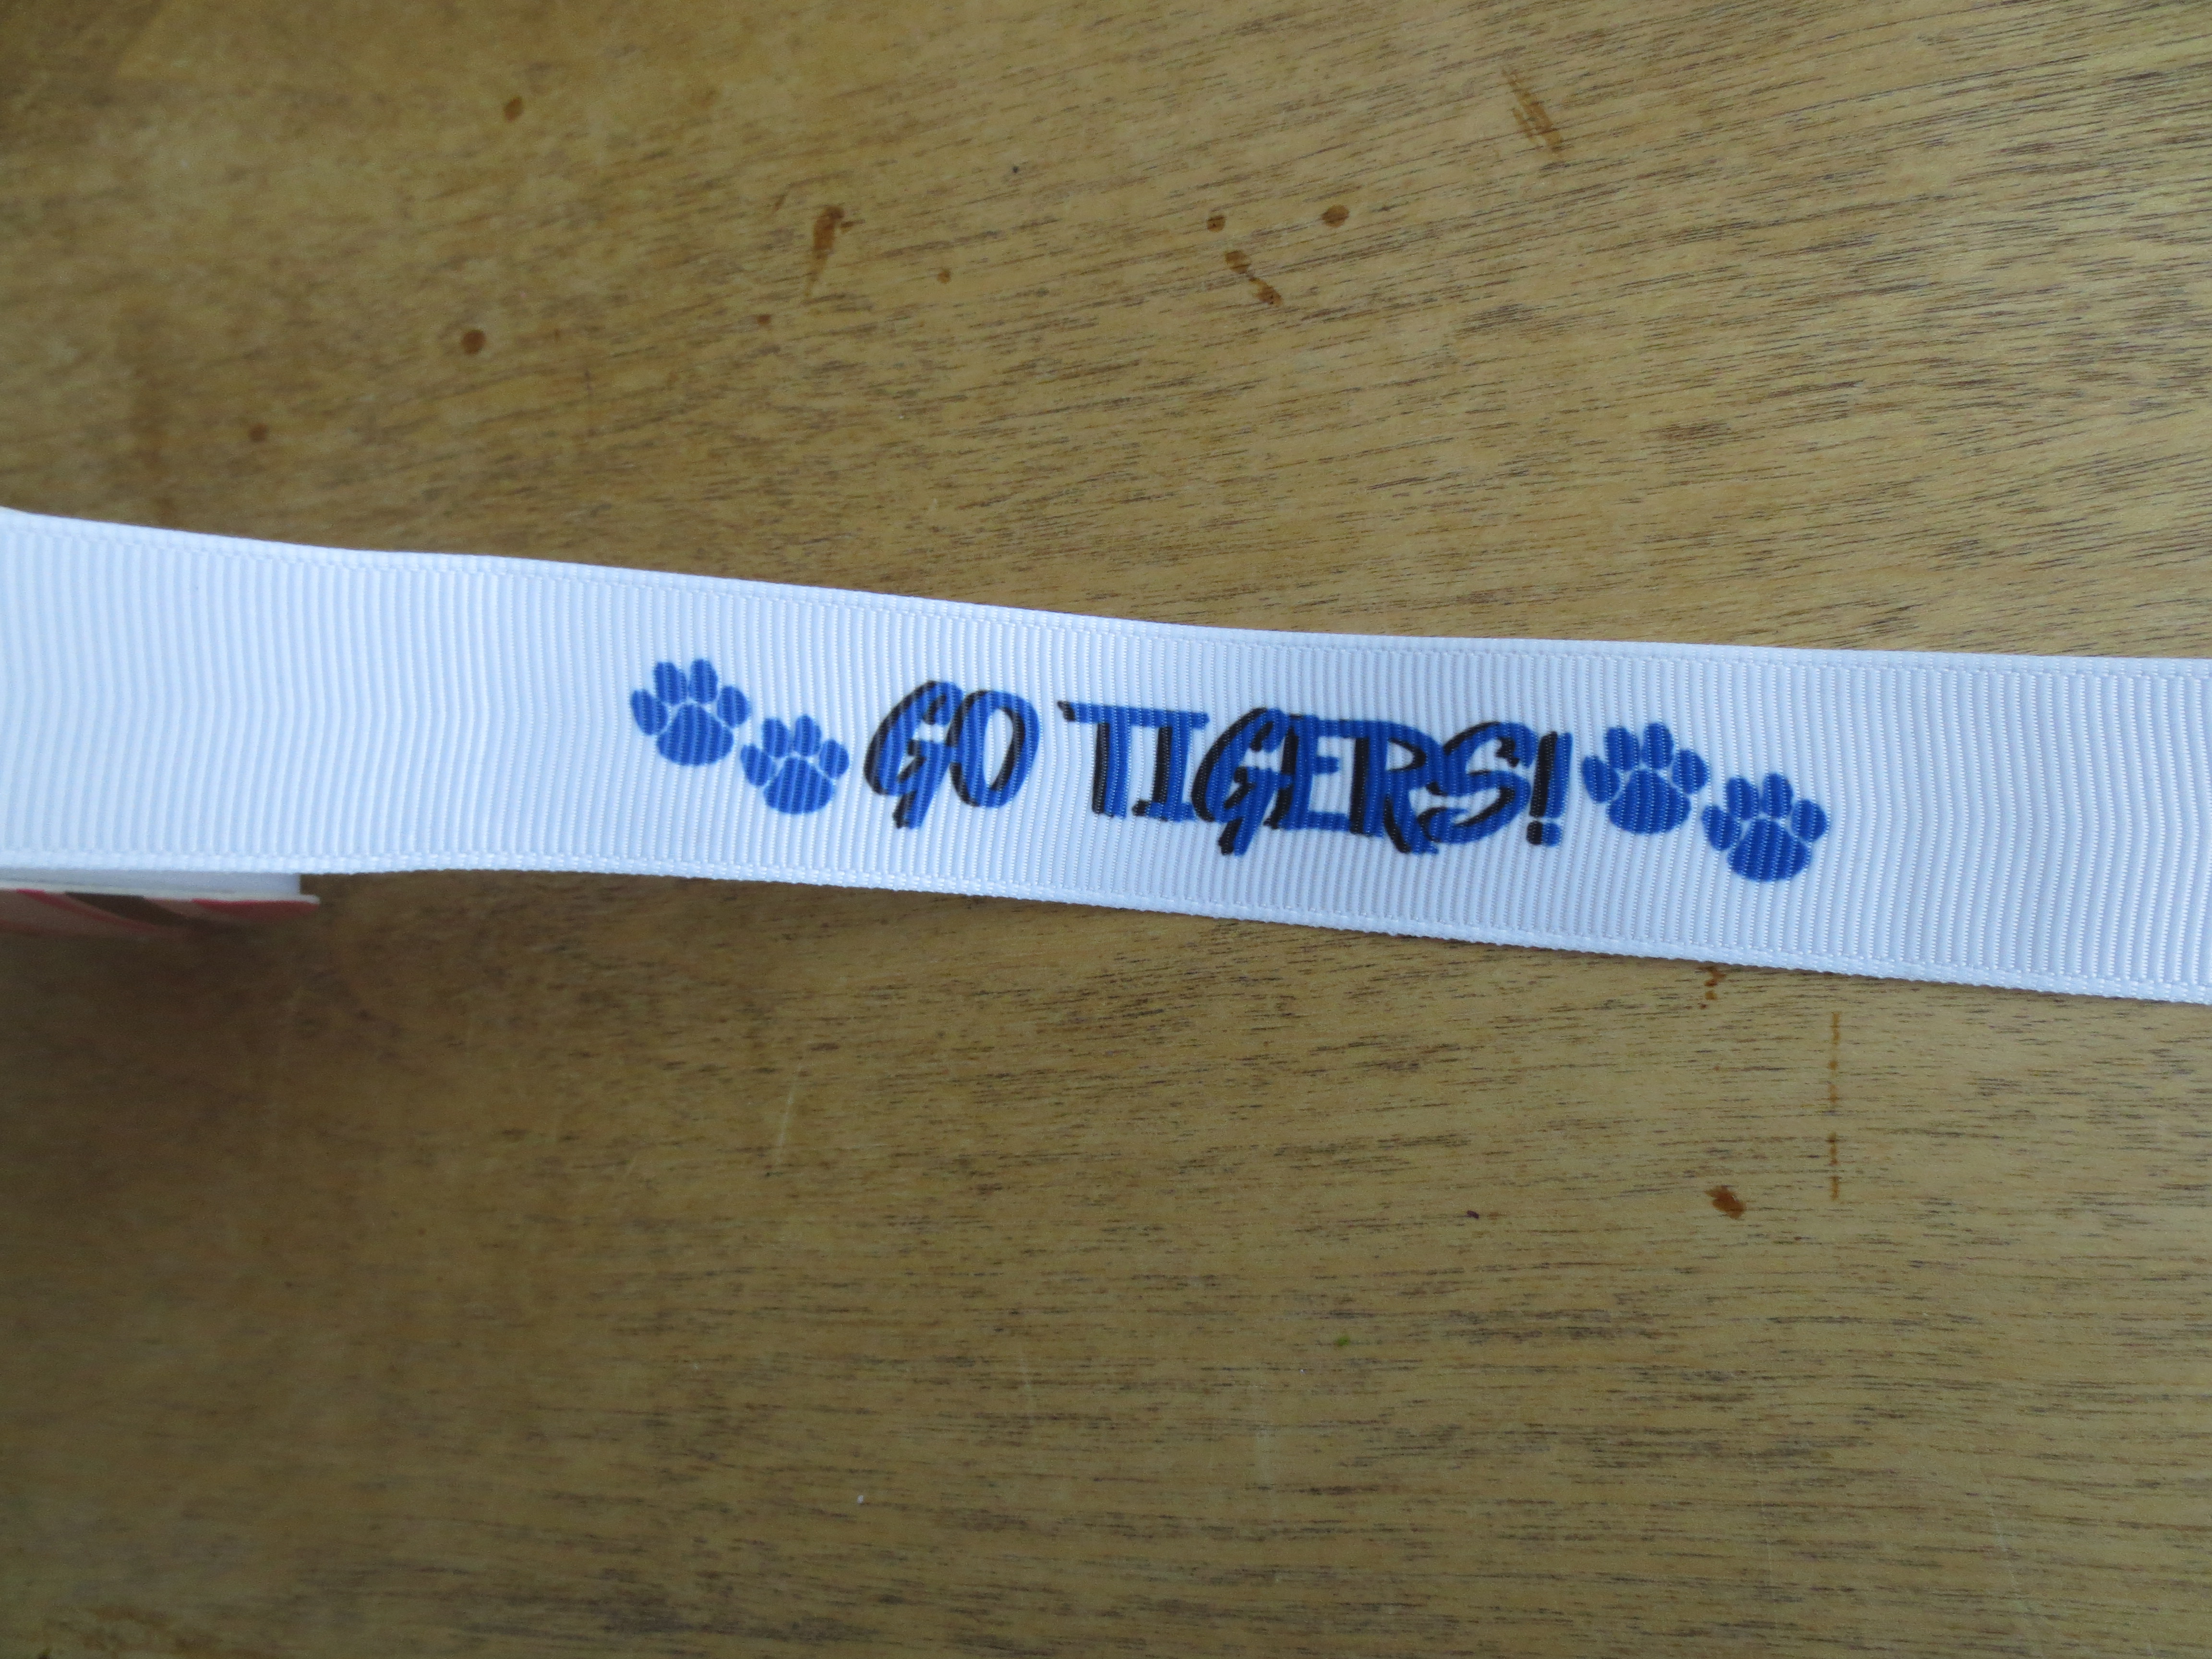 Personalized Ribbons made with sublimation printing